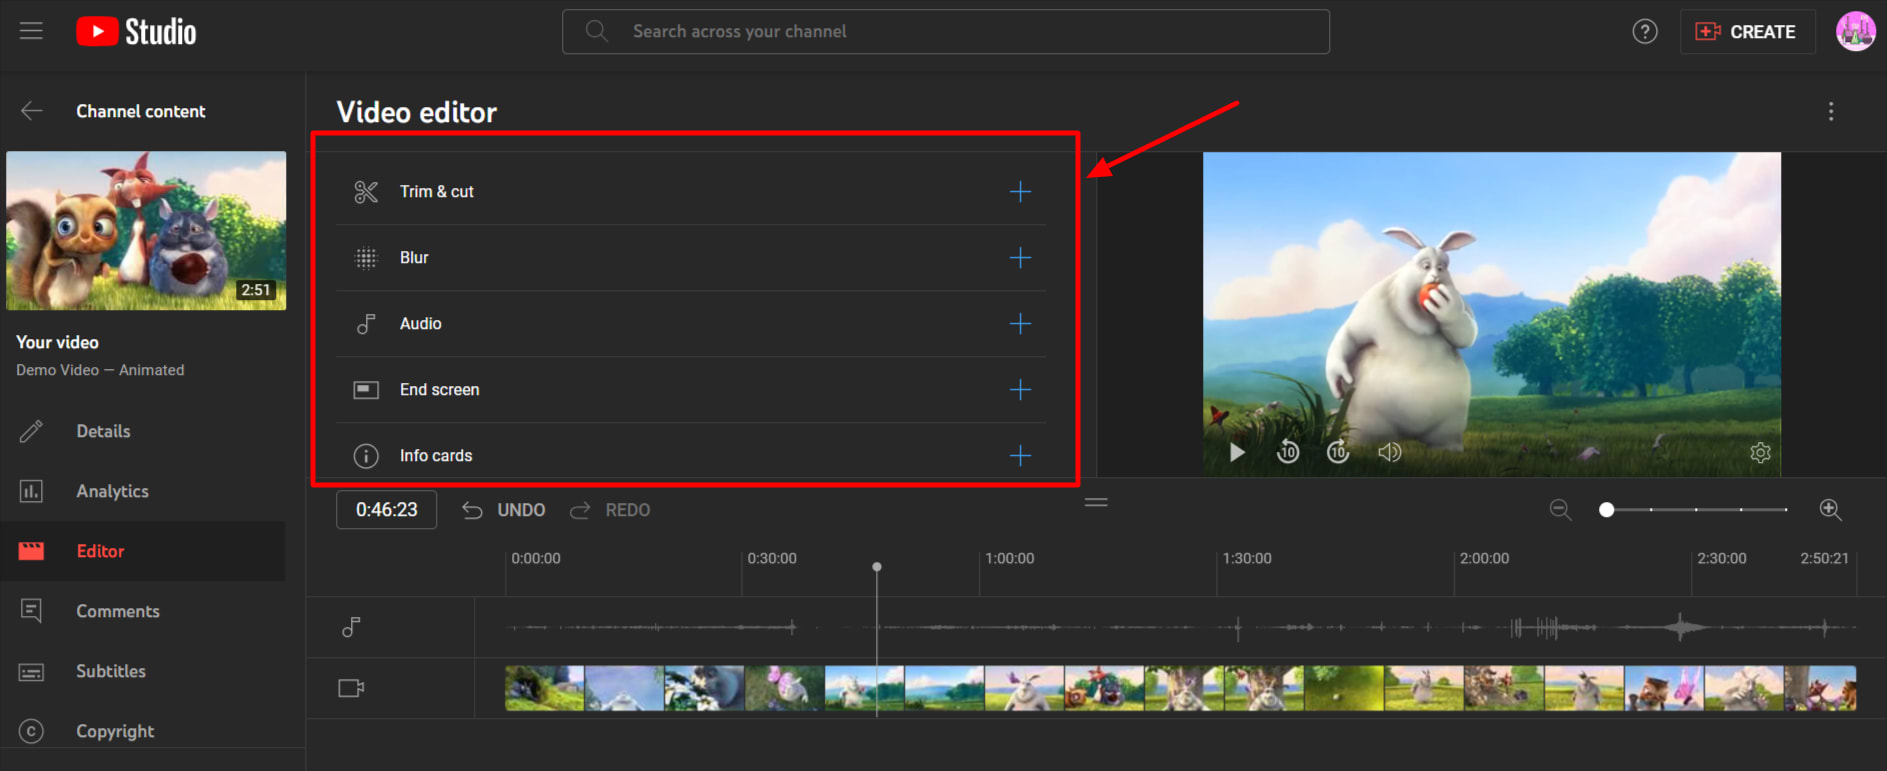 Choose one of five editing options available in YouTube’s editor